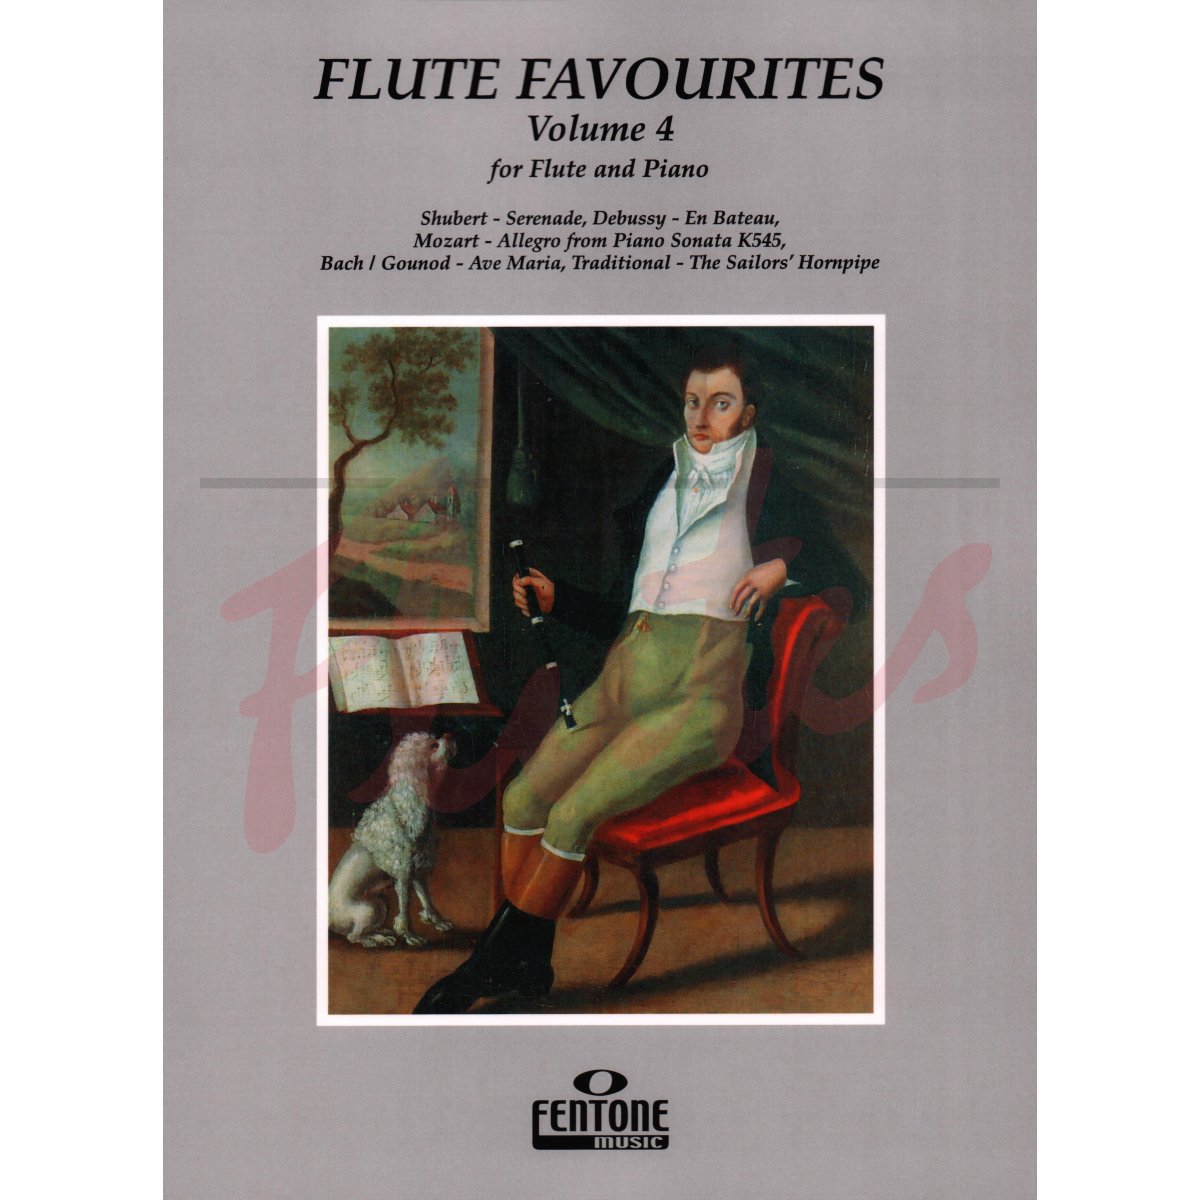 Flute Favourites for Flute and Piano